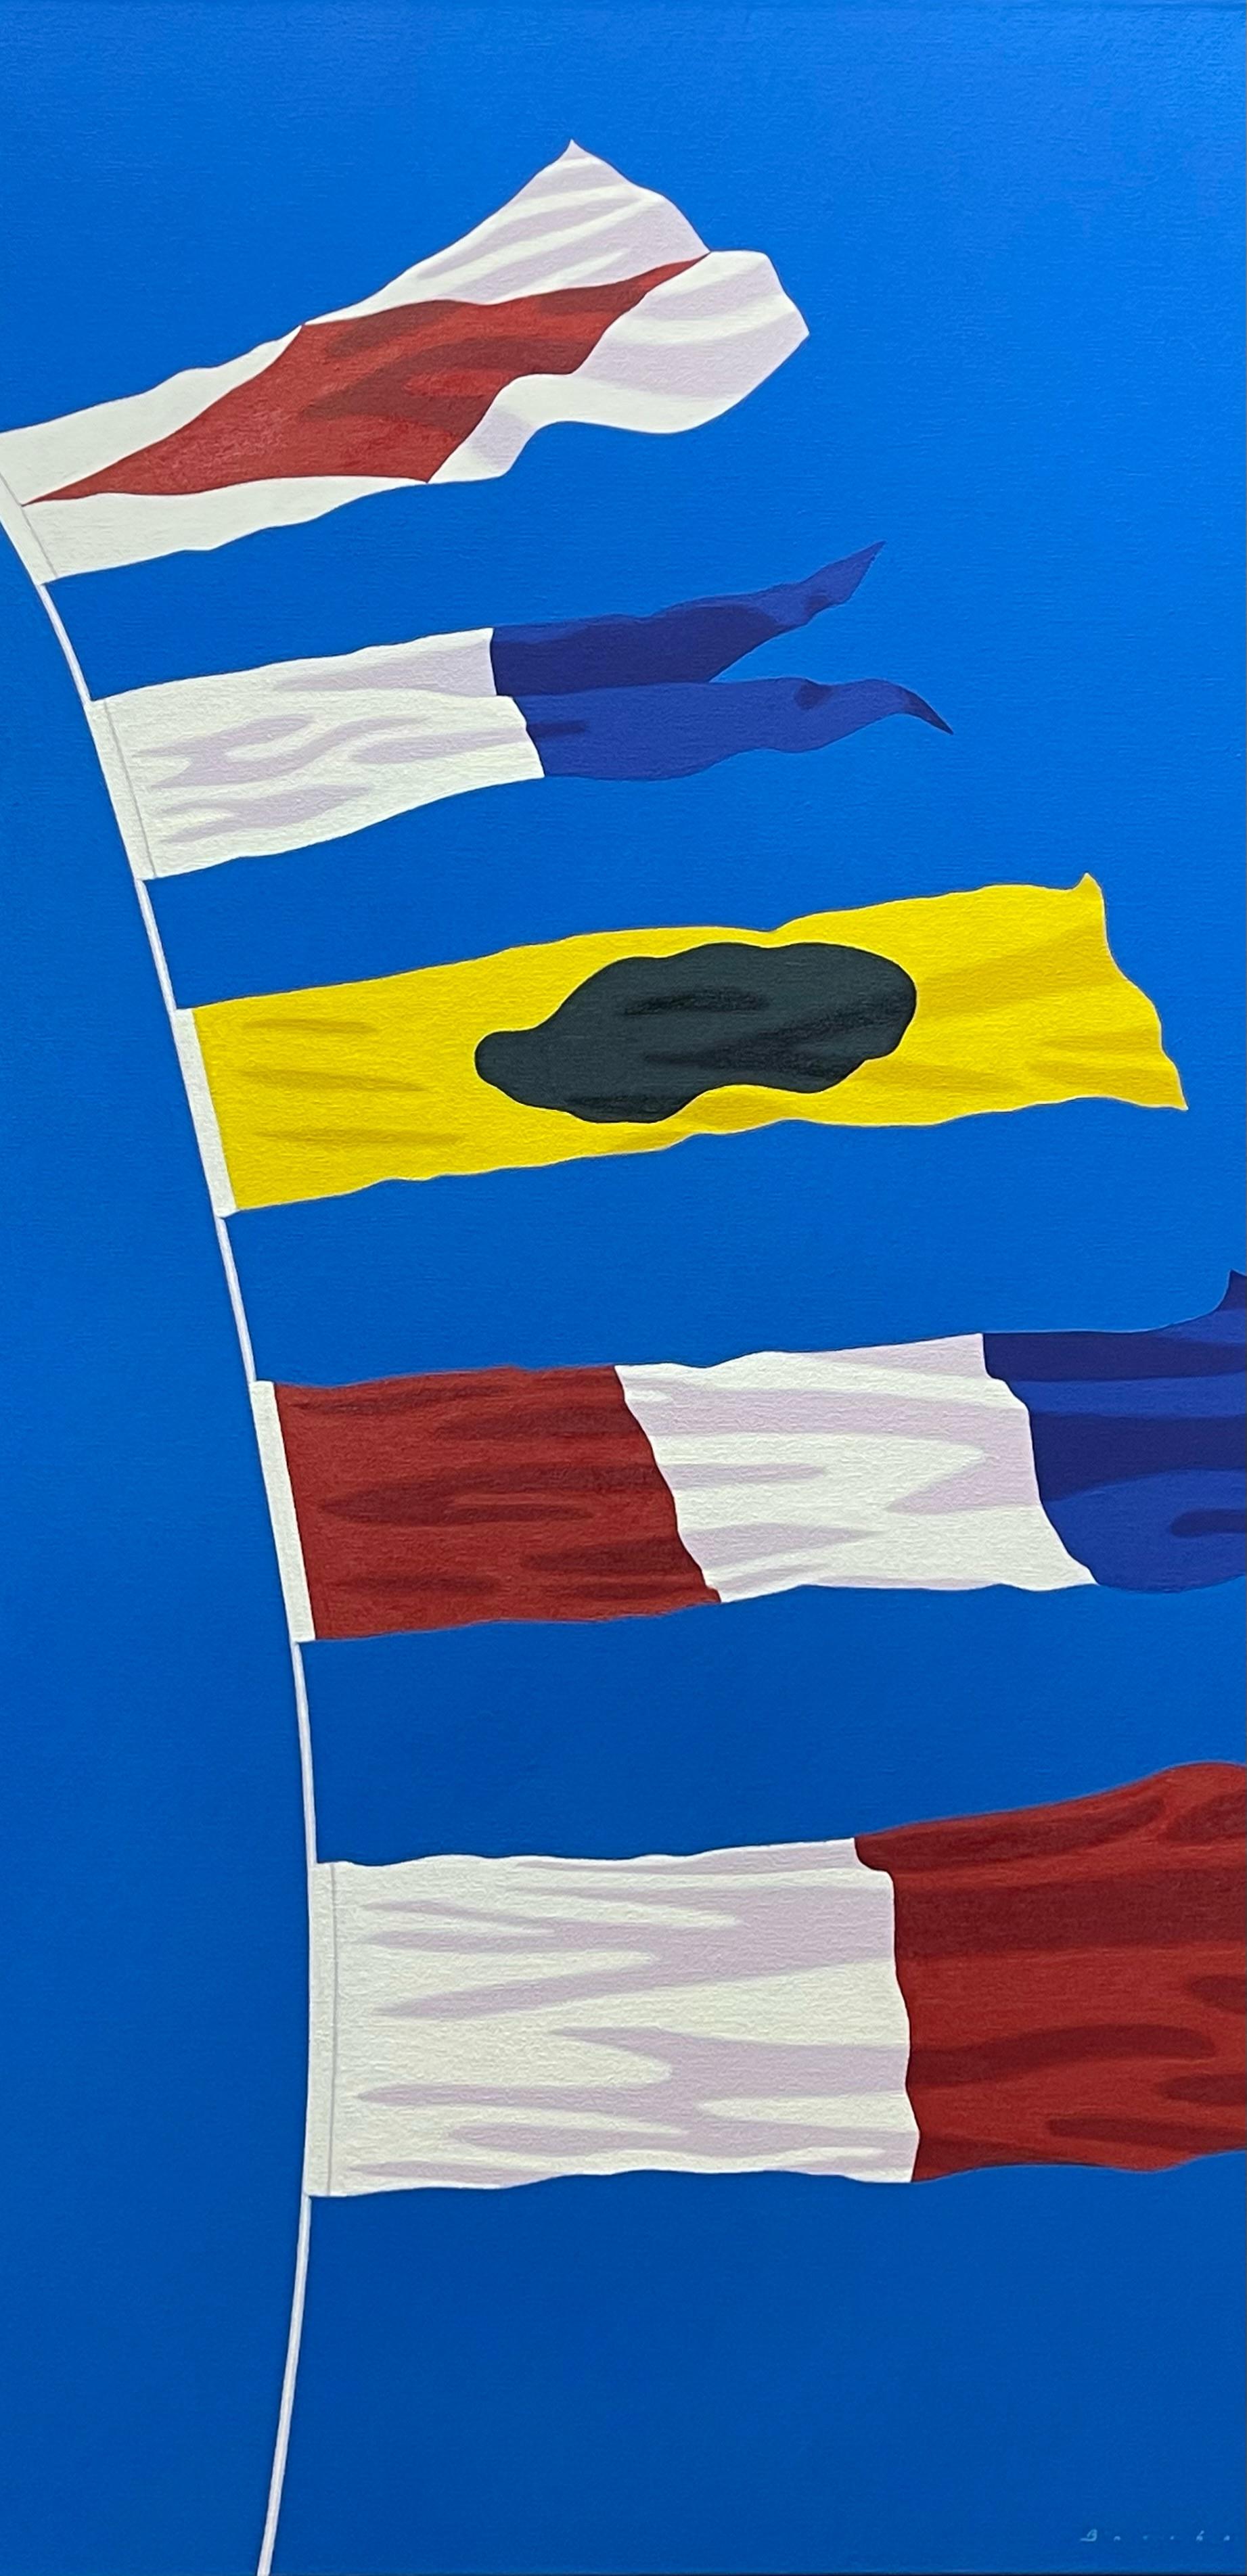 Rob Brooks Figurative Painting - "FAITH" Vertical oil painting of 5 nautical Flags against a cobalt blue sky.